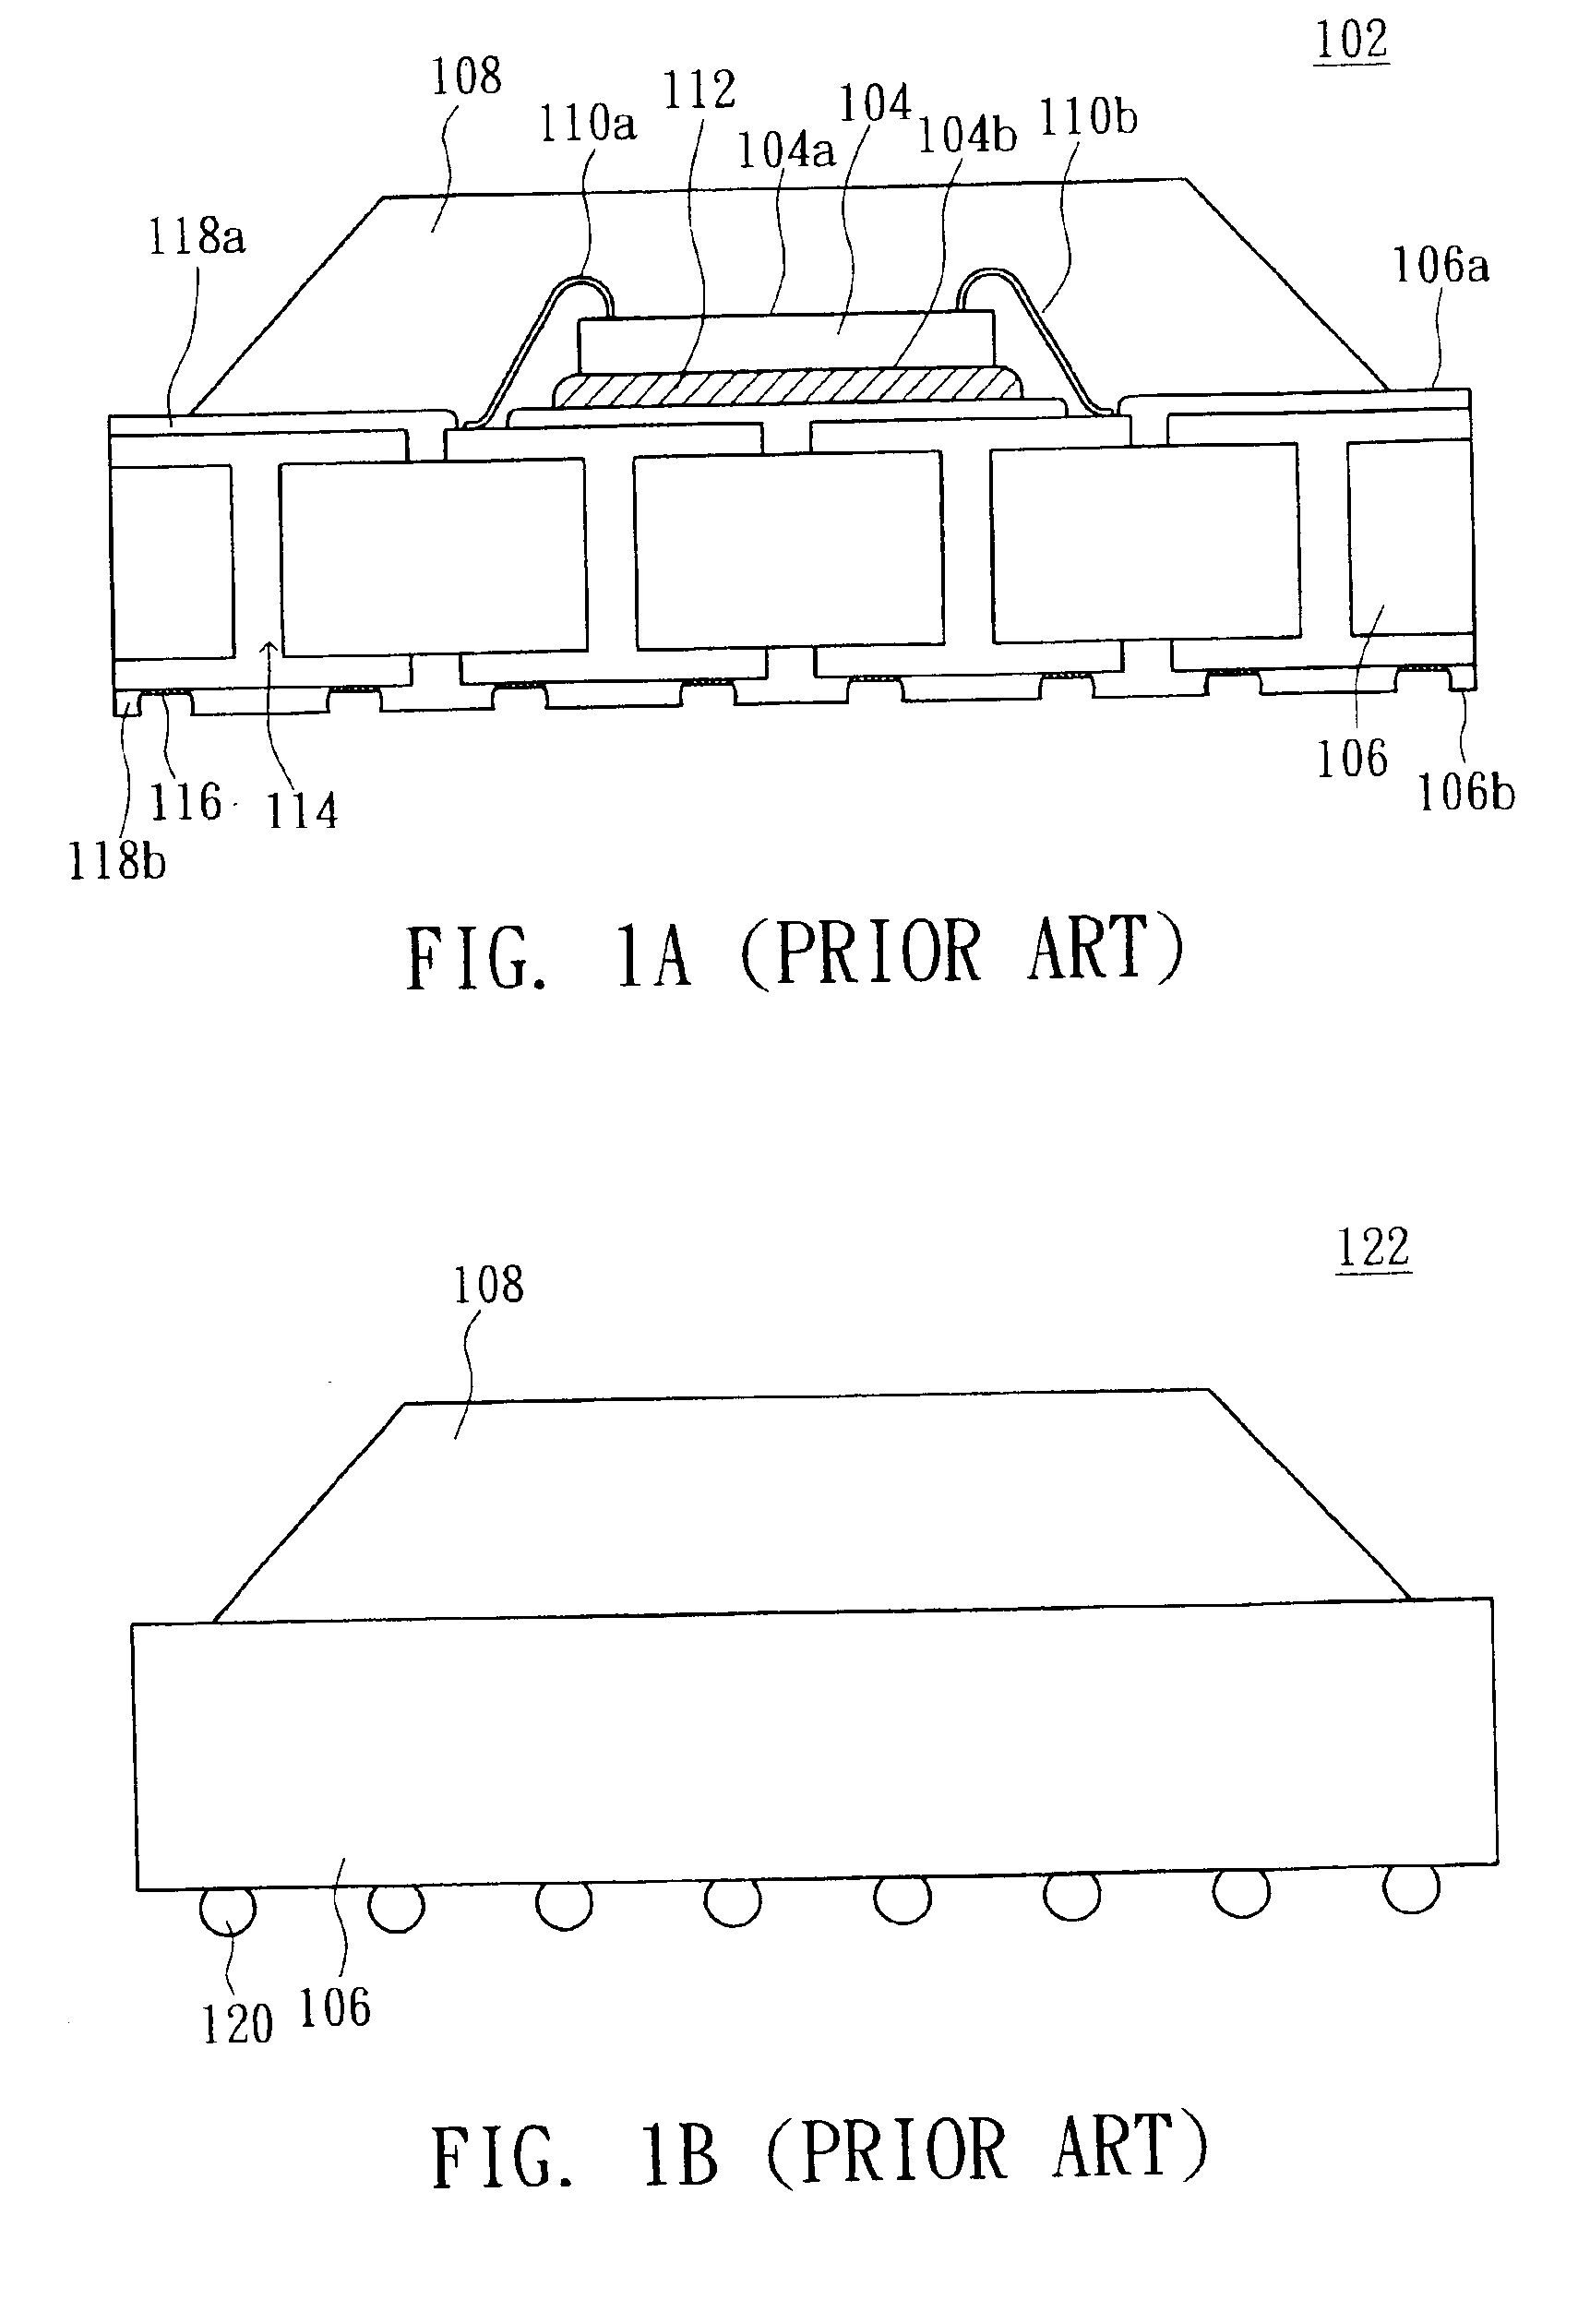 Elastomer interposer for grid array packages and method of manufacturing the same